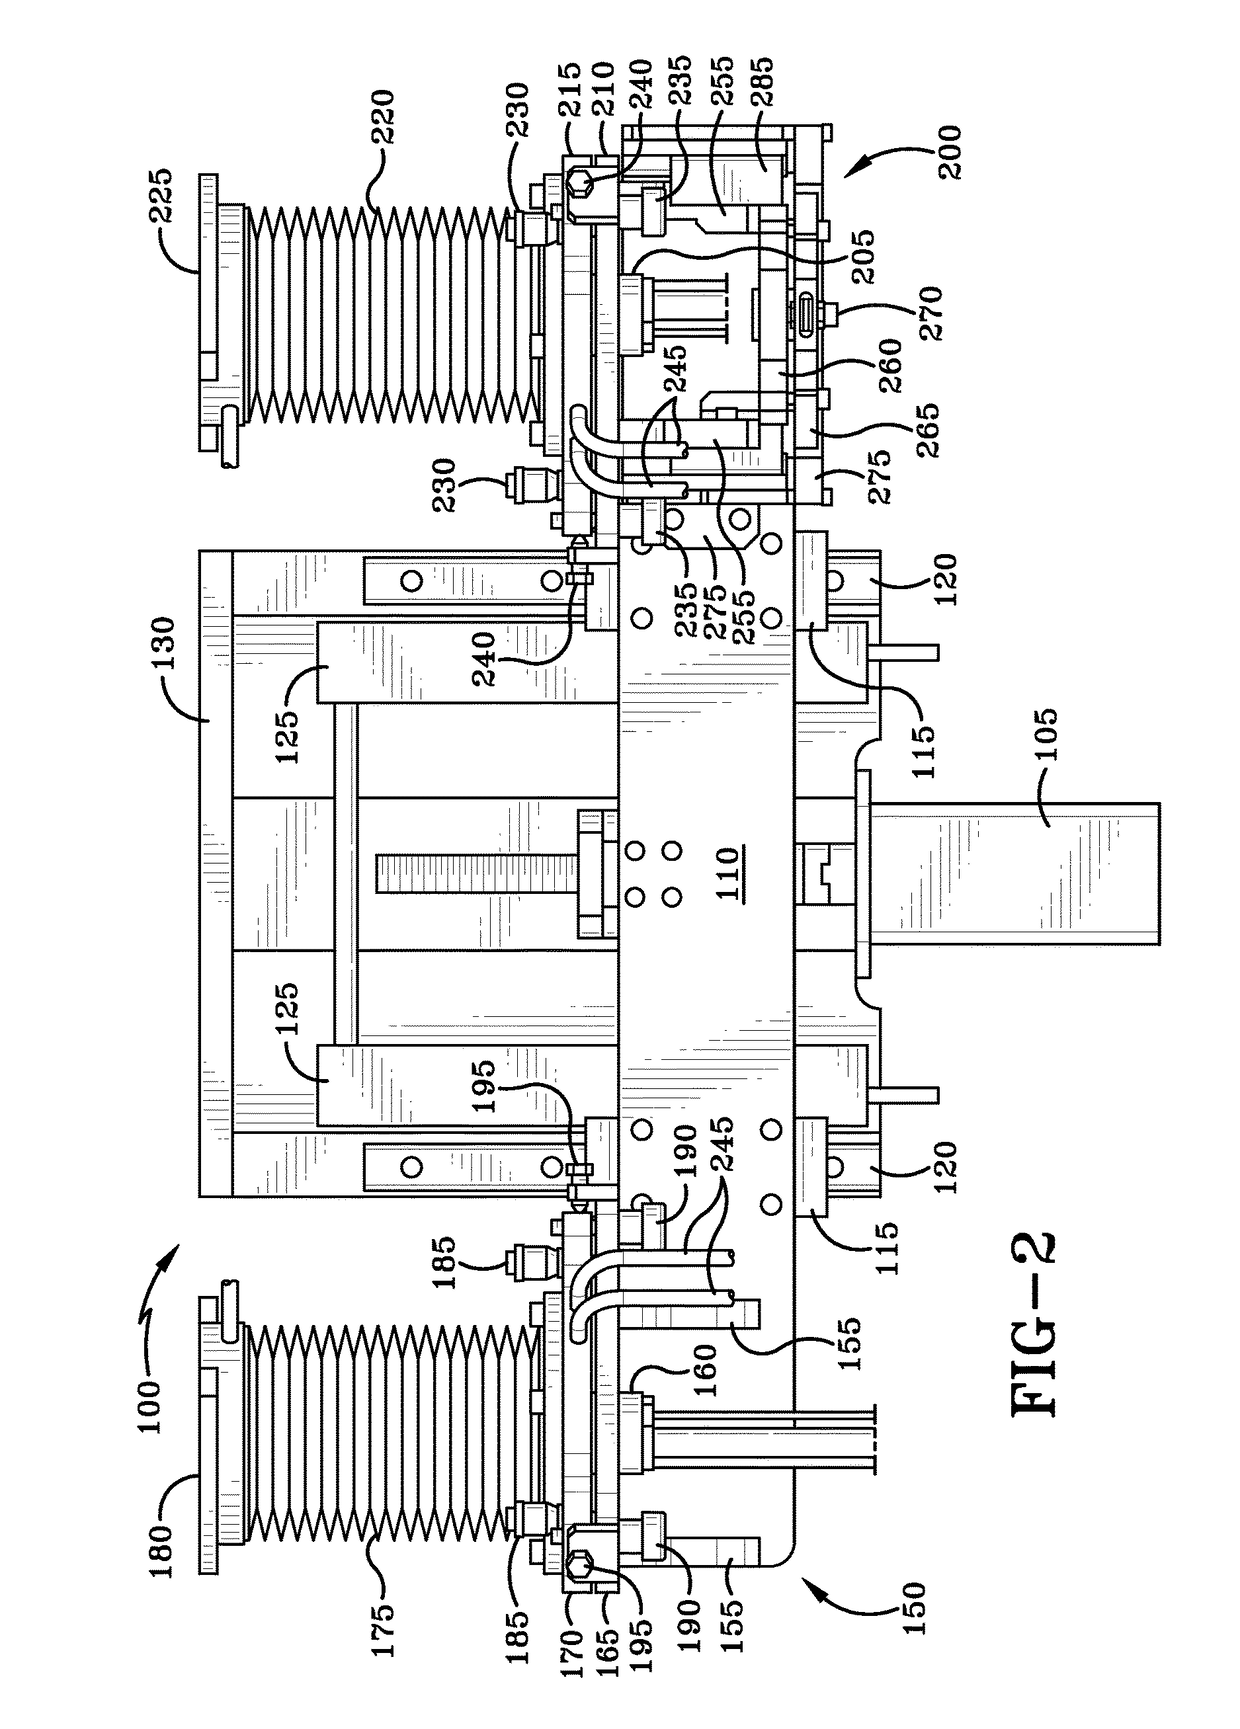 Variable adjustment for precise matching of multiple chamber cavity housings